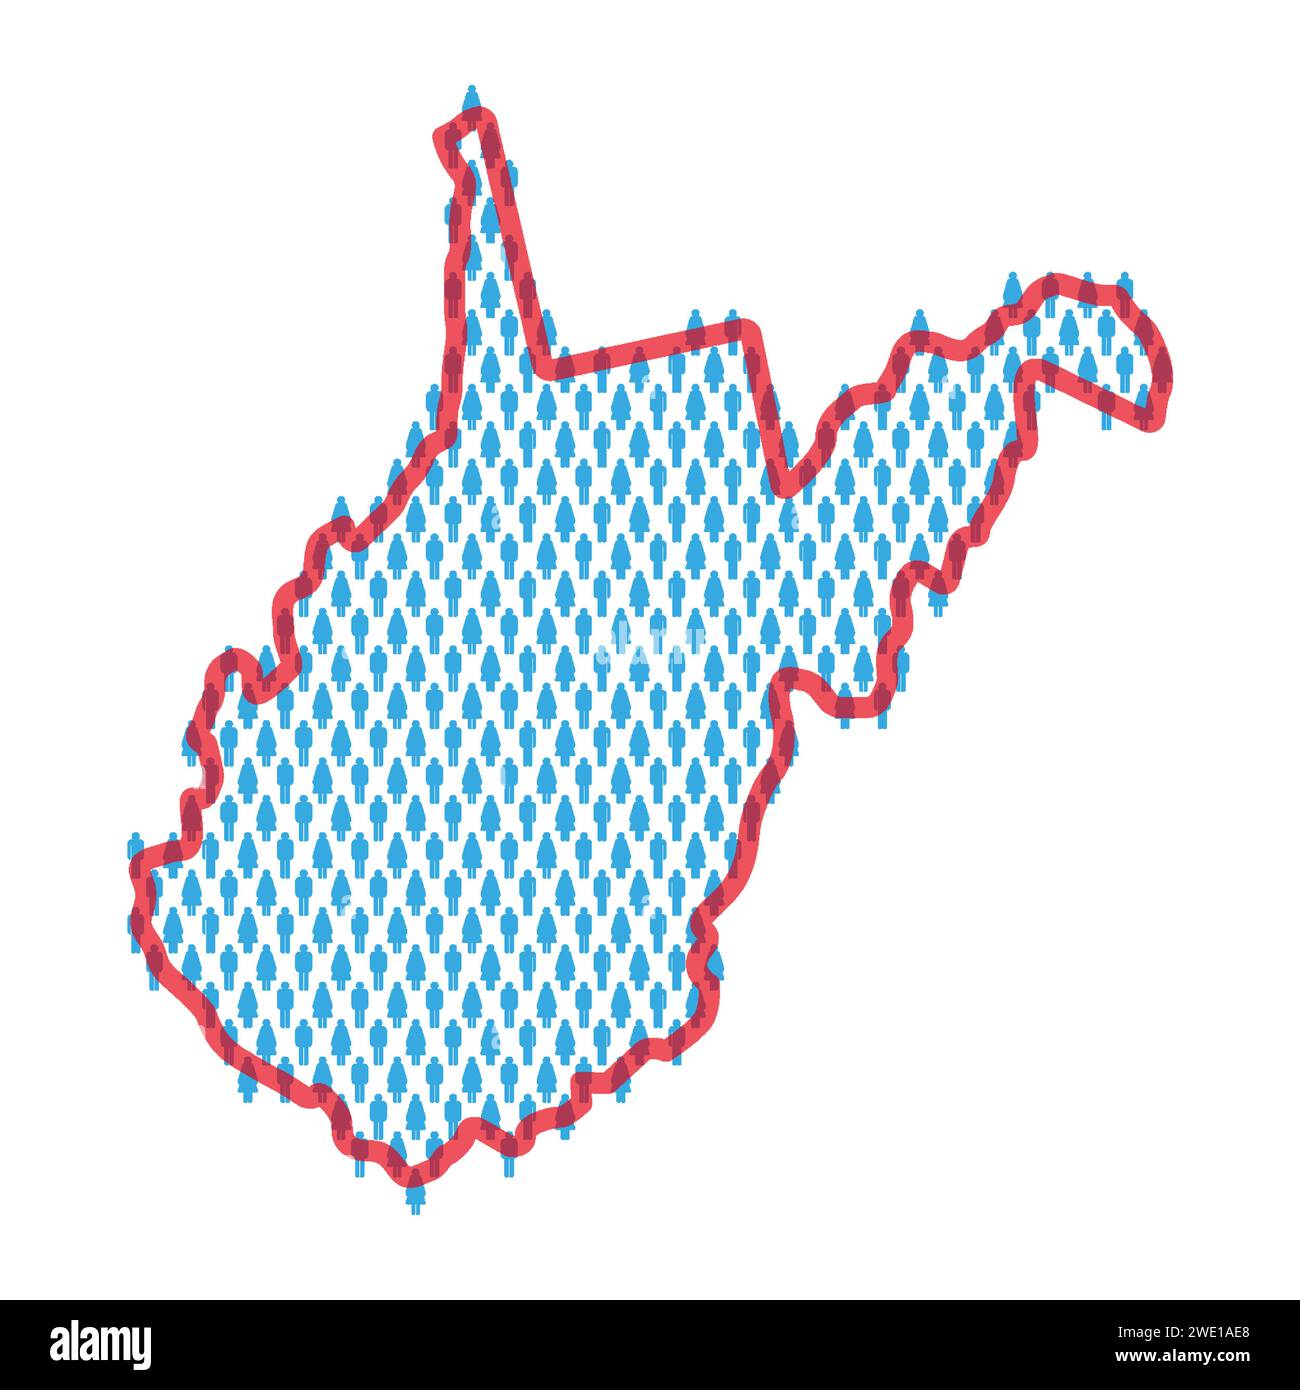 West Virginia population map. Stick figures people map with bold red translucent state border. Pattern of men and women icons. Isolated vector illustr Stock Vector